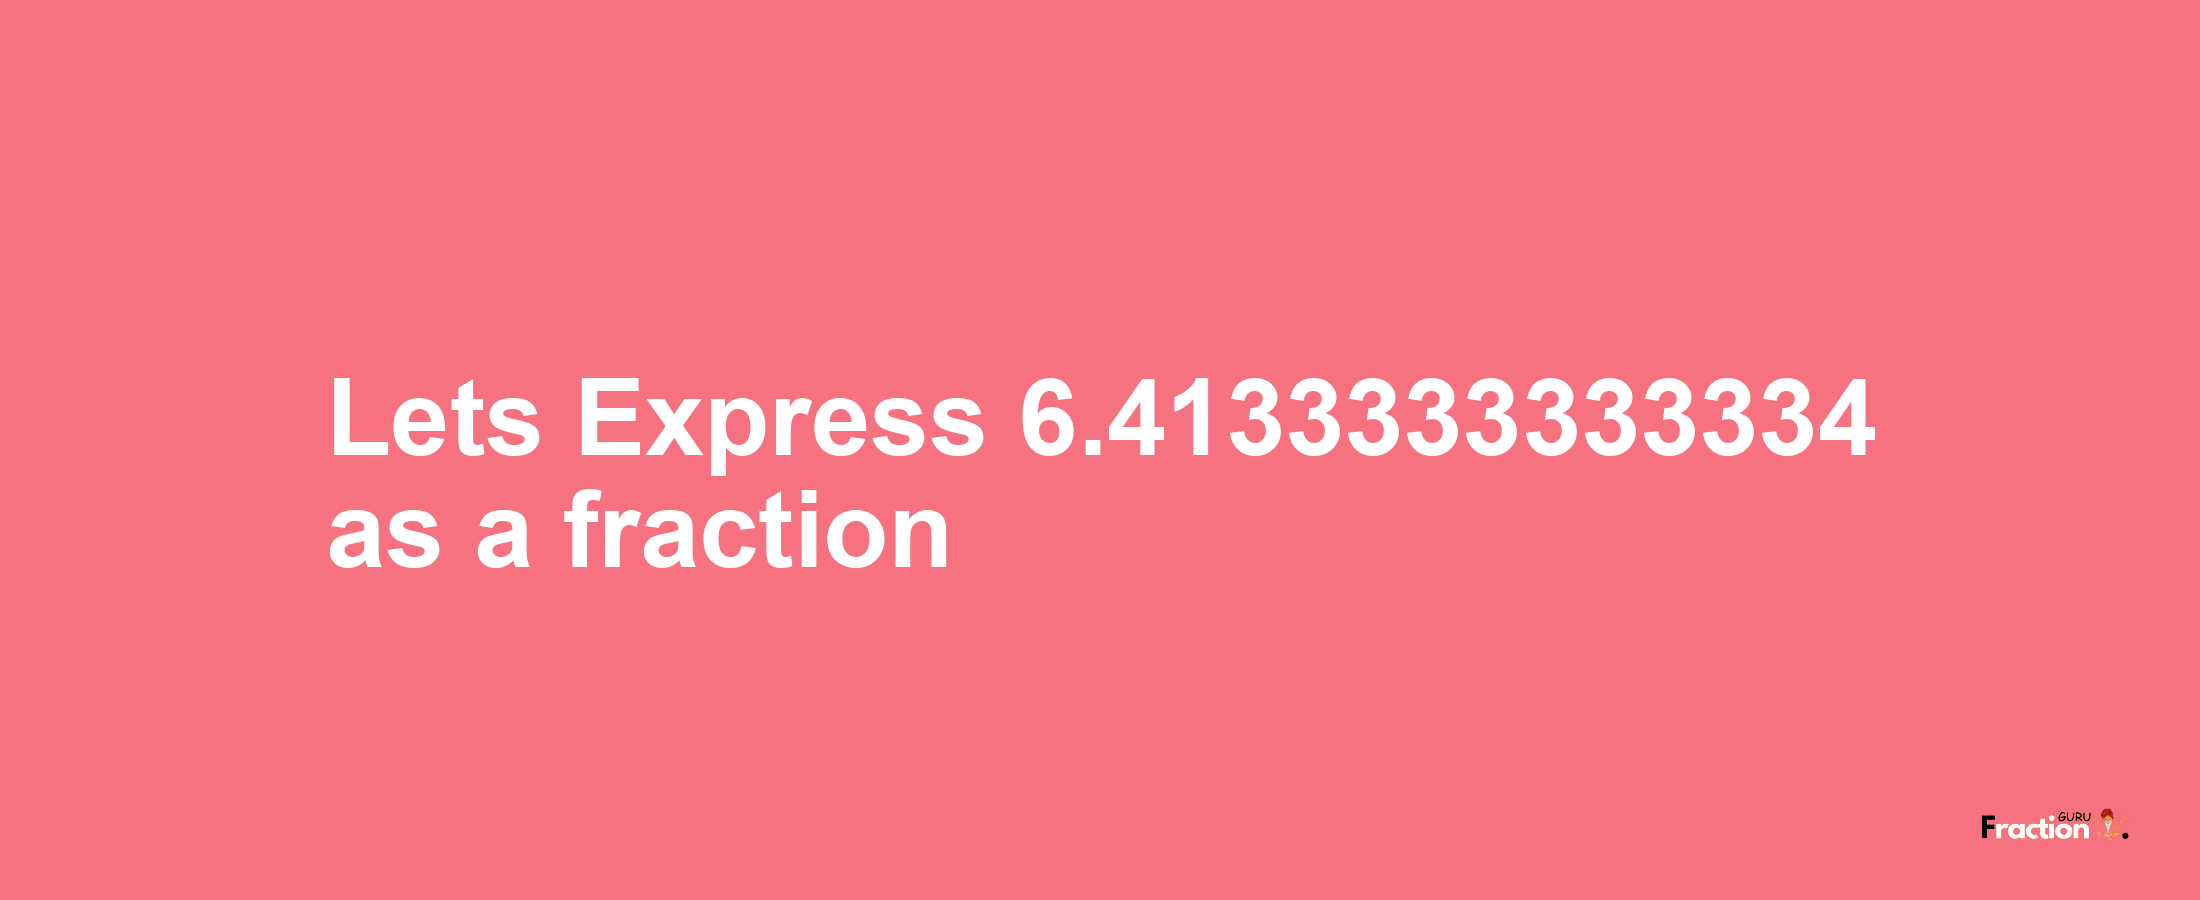 Lets Express 6.4133333333334 as afraction